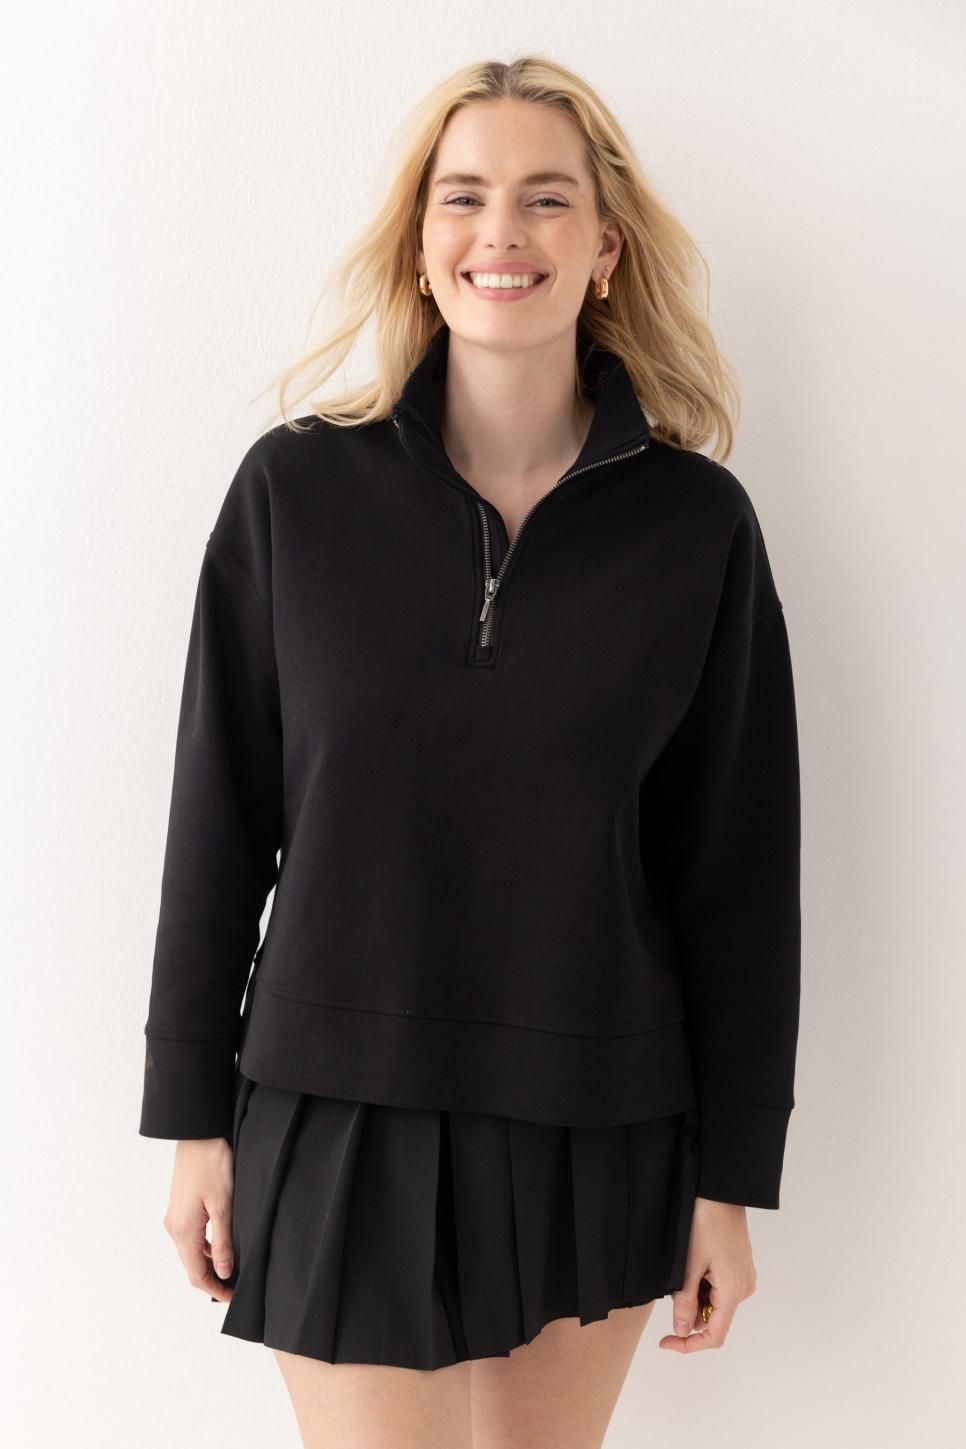 rx-honorshonors-womens-the-half-zip-pullover.jpeg